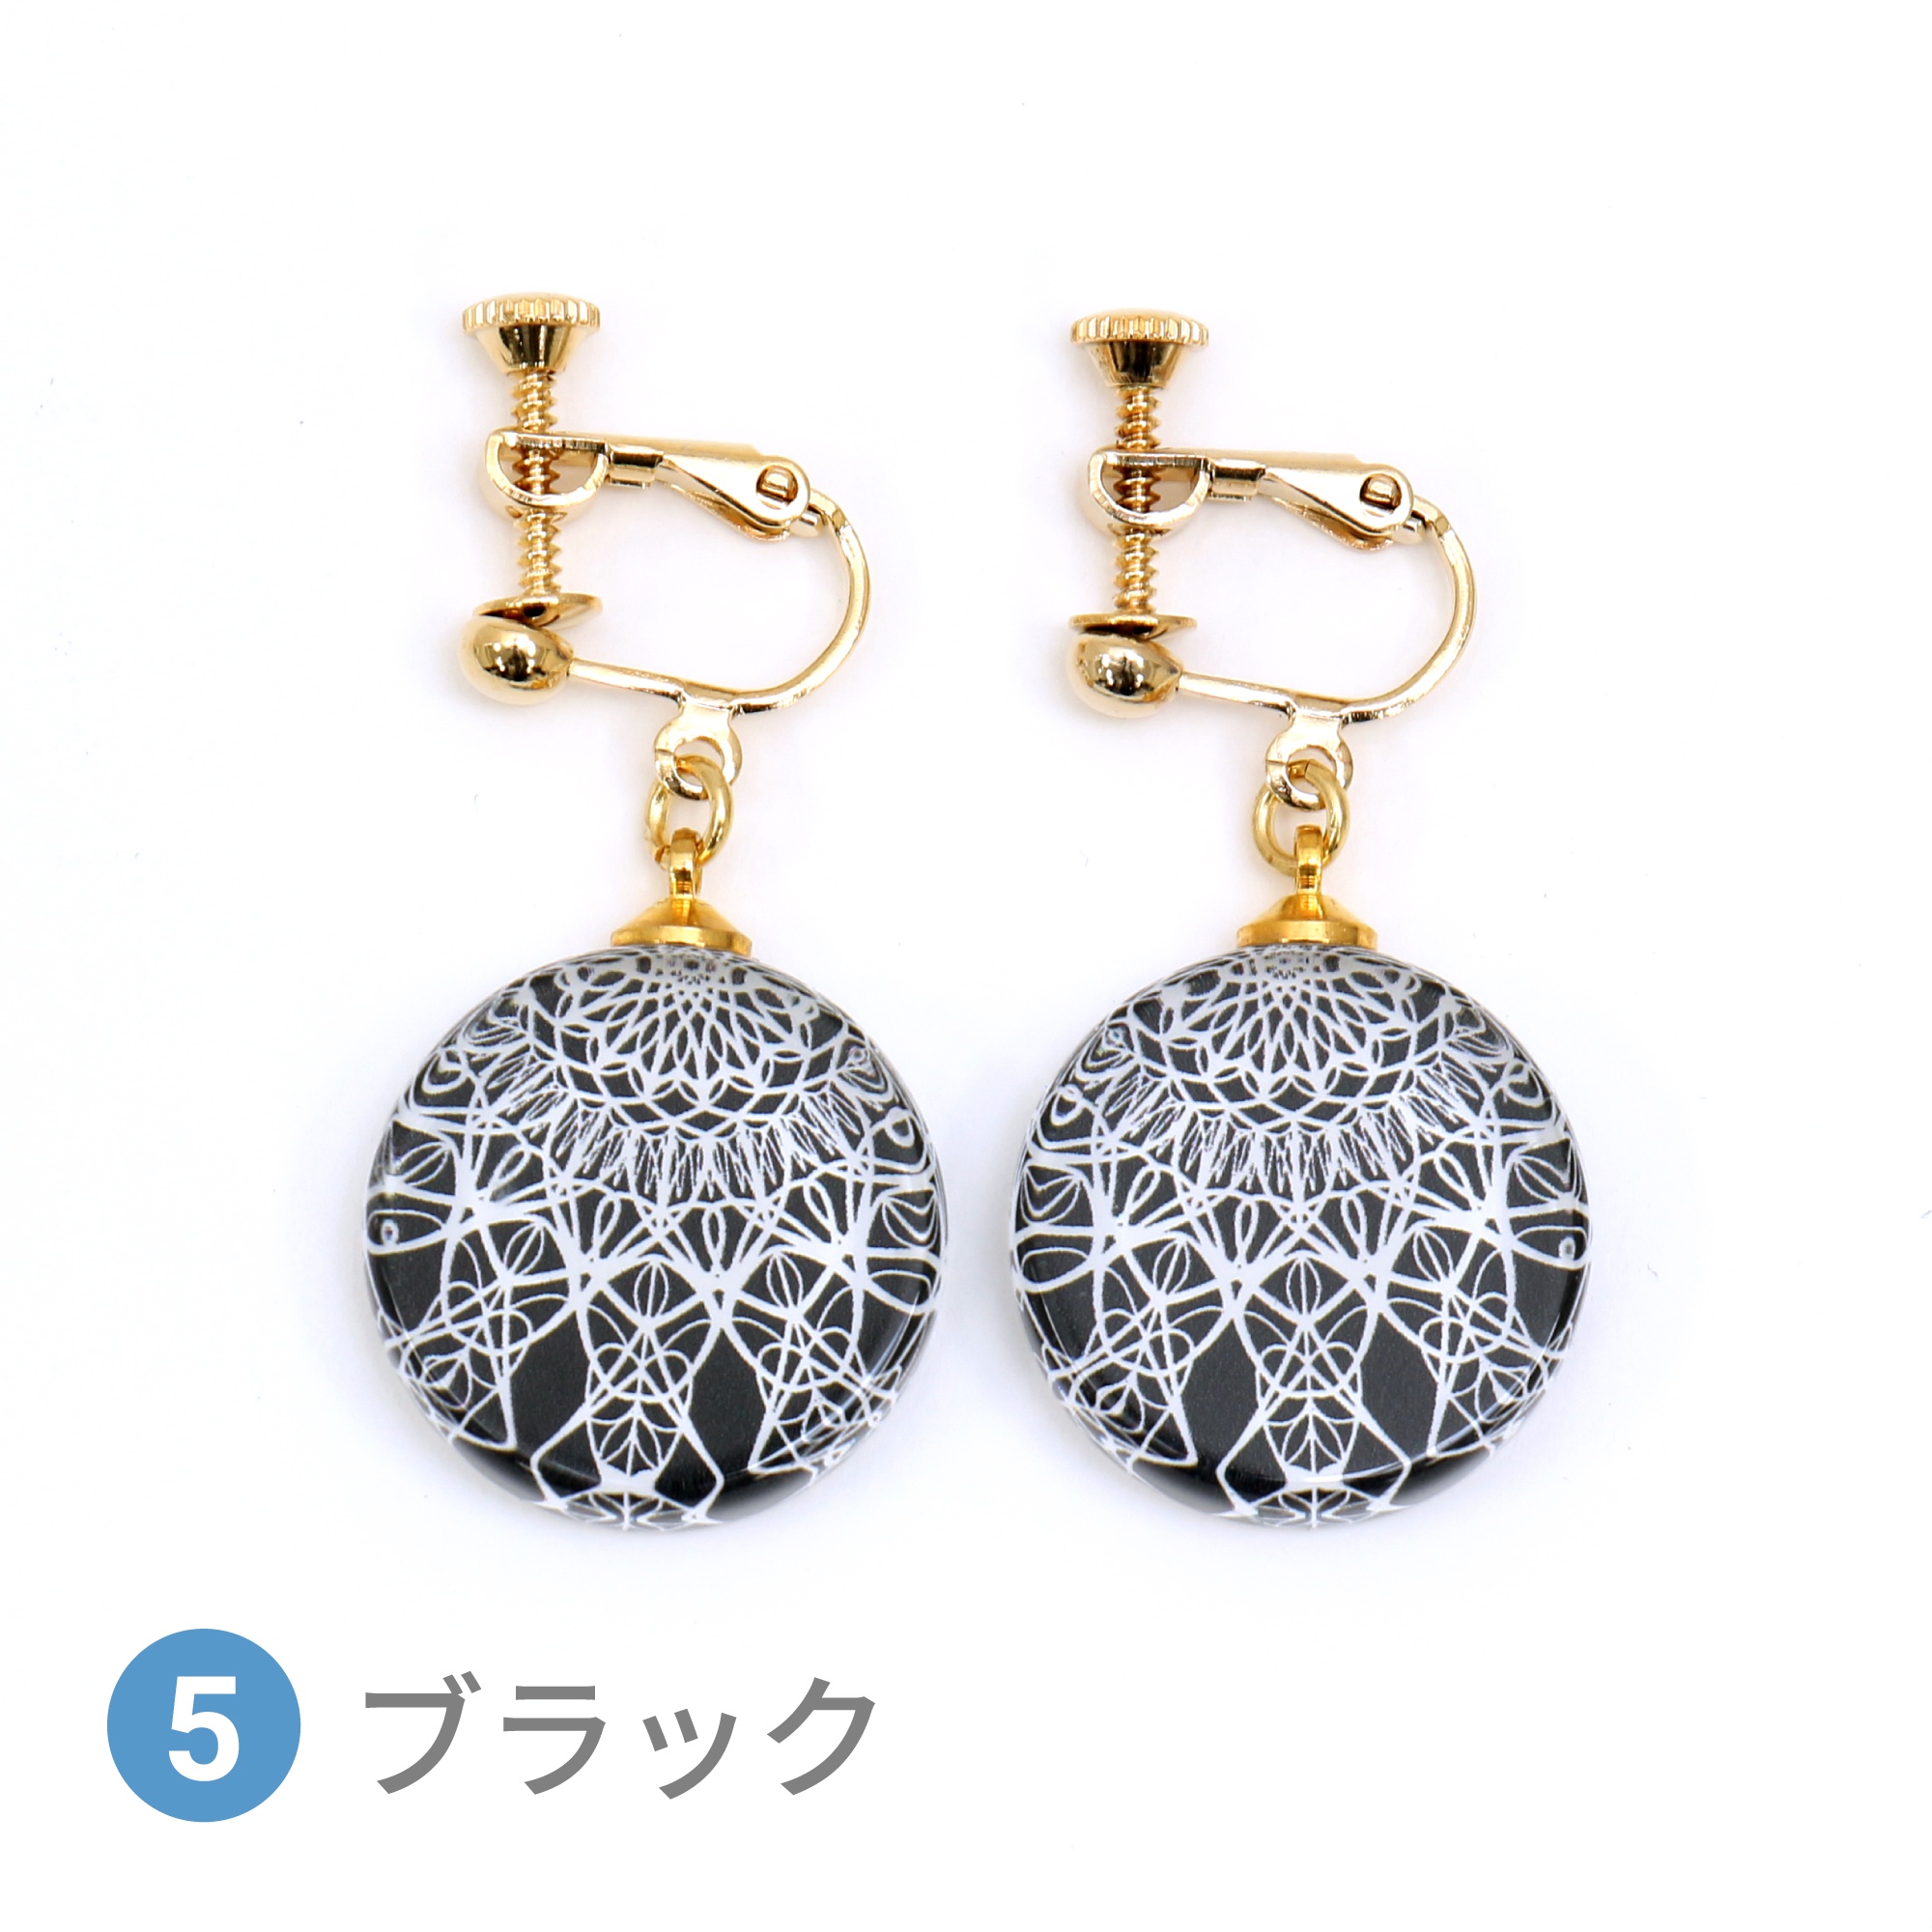 Glass accessories Earring LACE black round shape